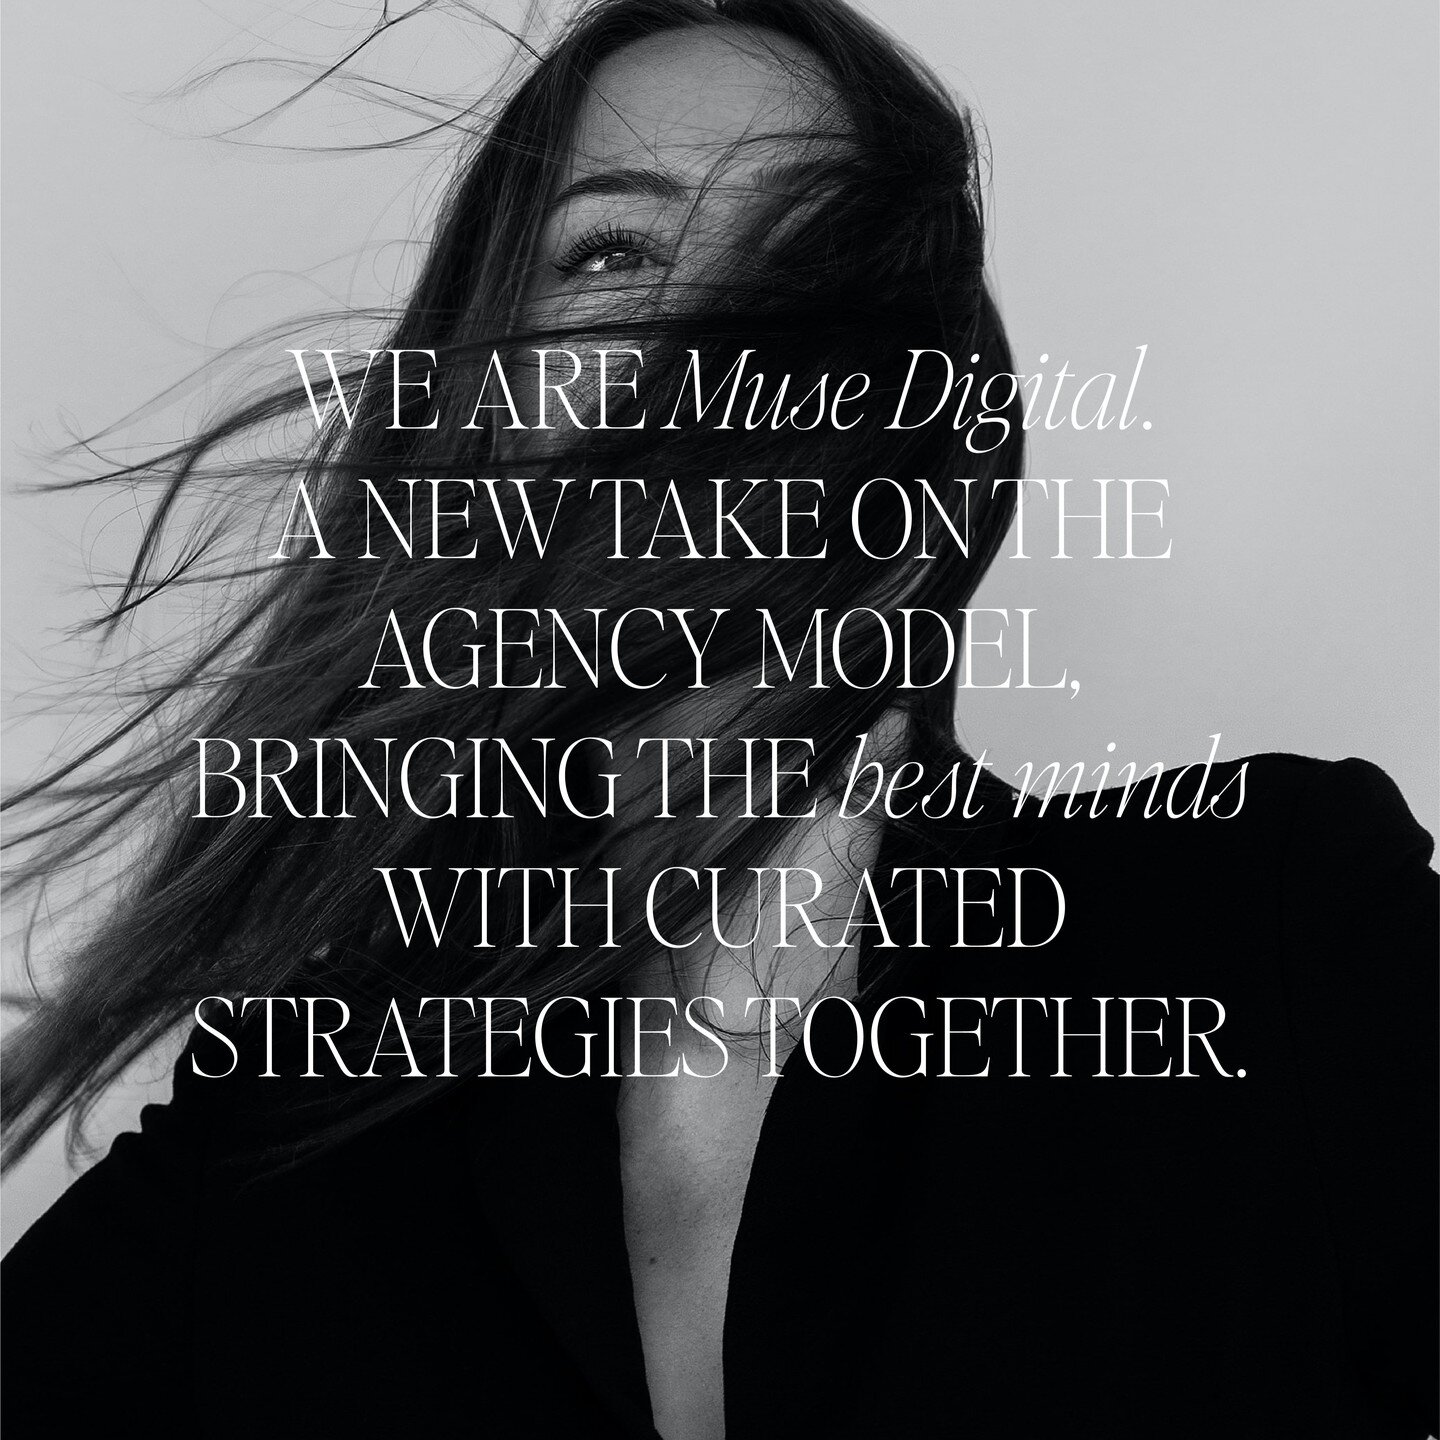 Let us reintroduce ourselves. We&rsquo;re Muse Digital.